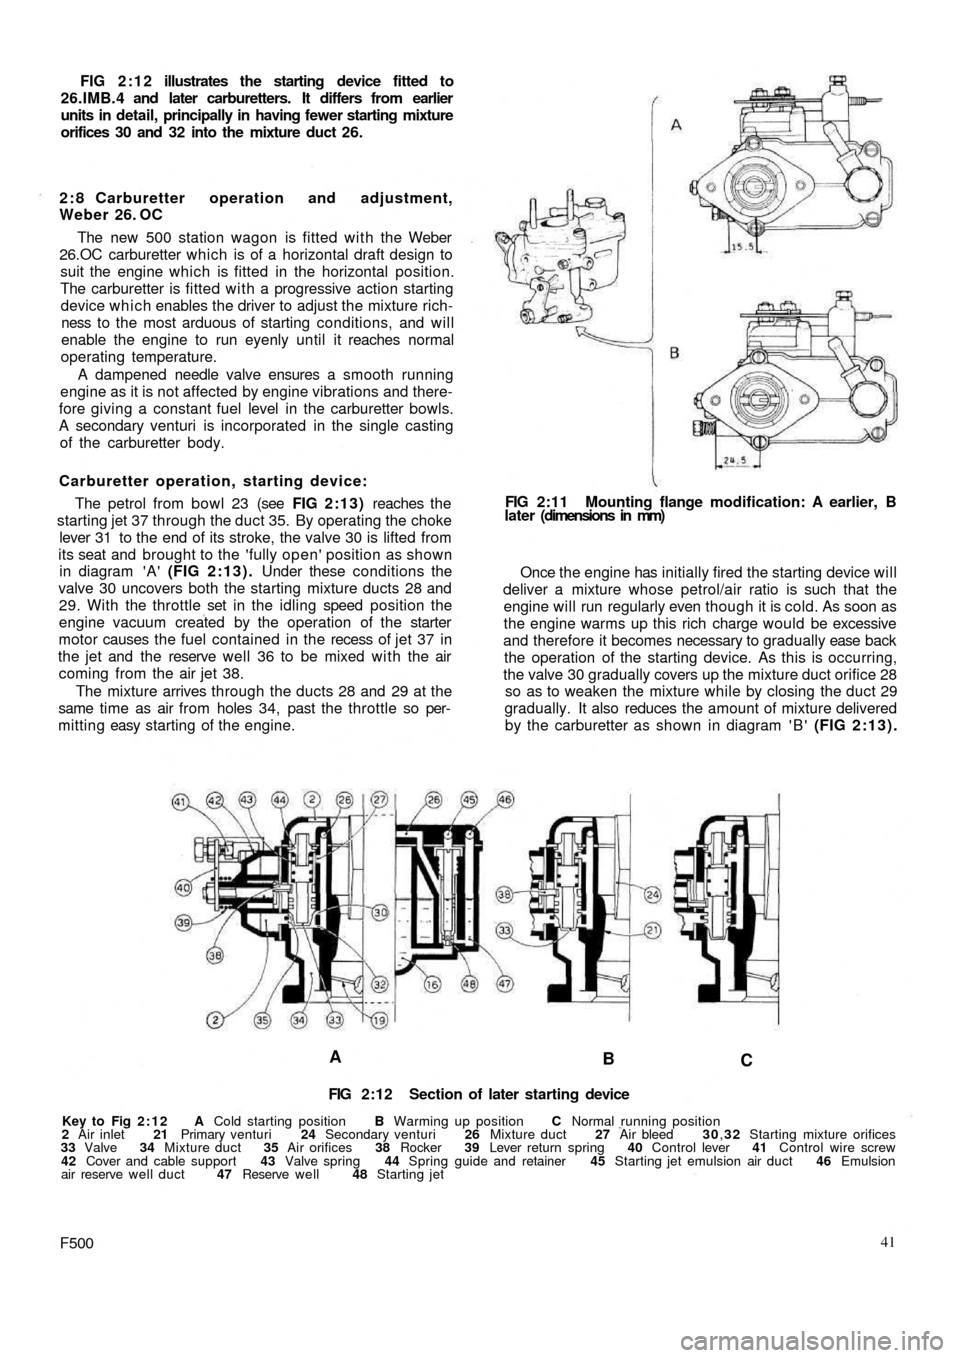 FIAT 500 1960 1.G Workshop Manual FIG 2:12 illustrates the starting device fitted to
26.IMB.4 and later carburetters. It differs from earlier
units in detail, principally in having fewer starting mixture
orifices 30 and 32 into the mi